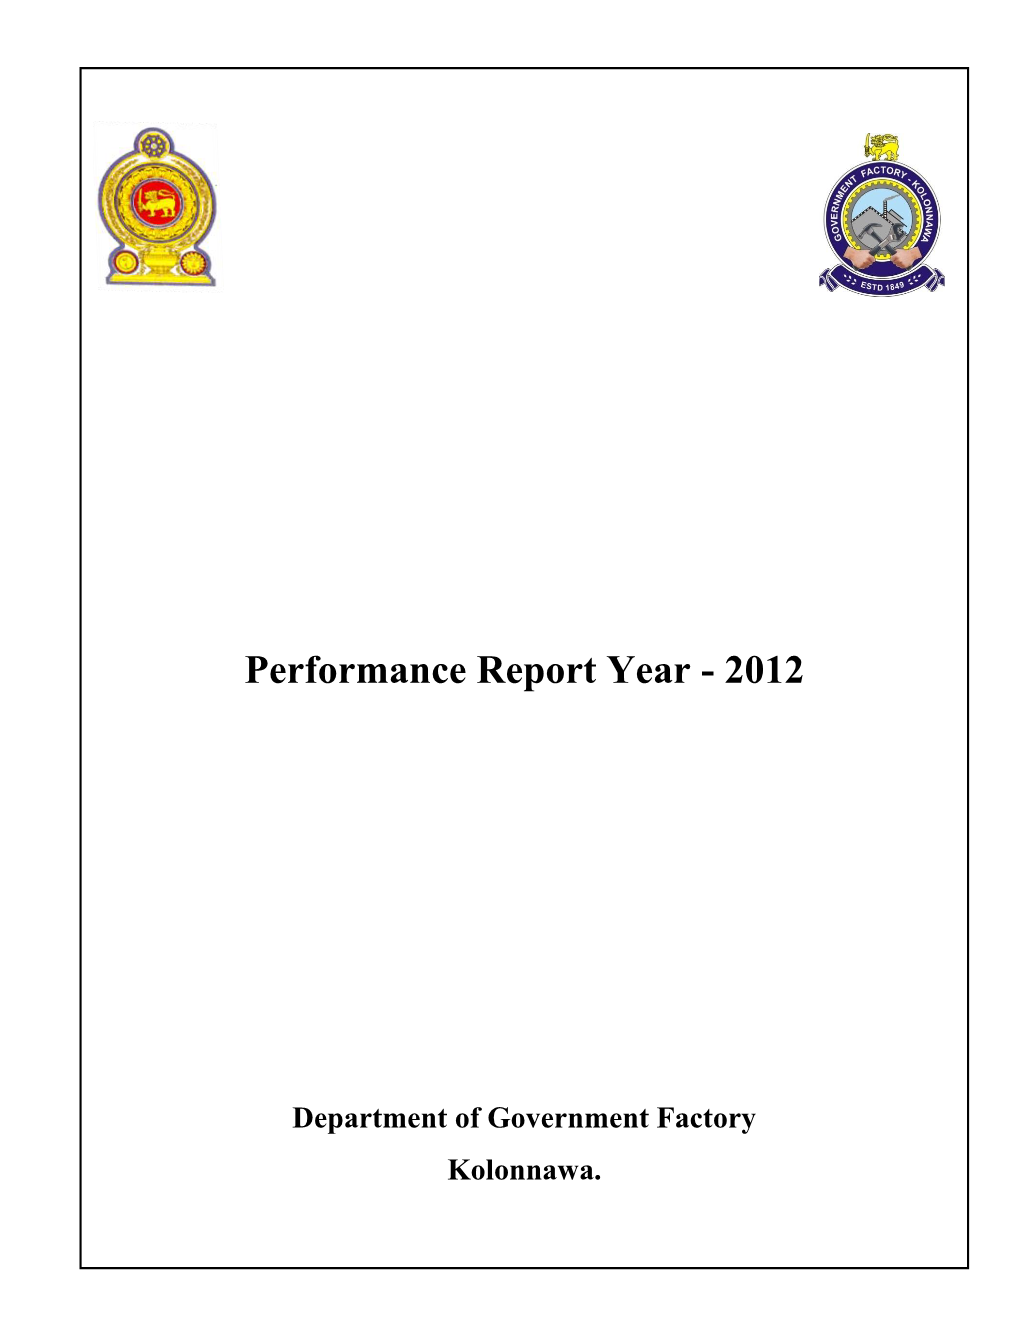 Performance Report of the Department of Government Factory for the Year 2012